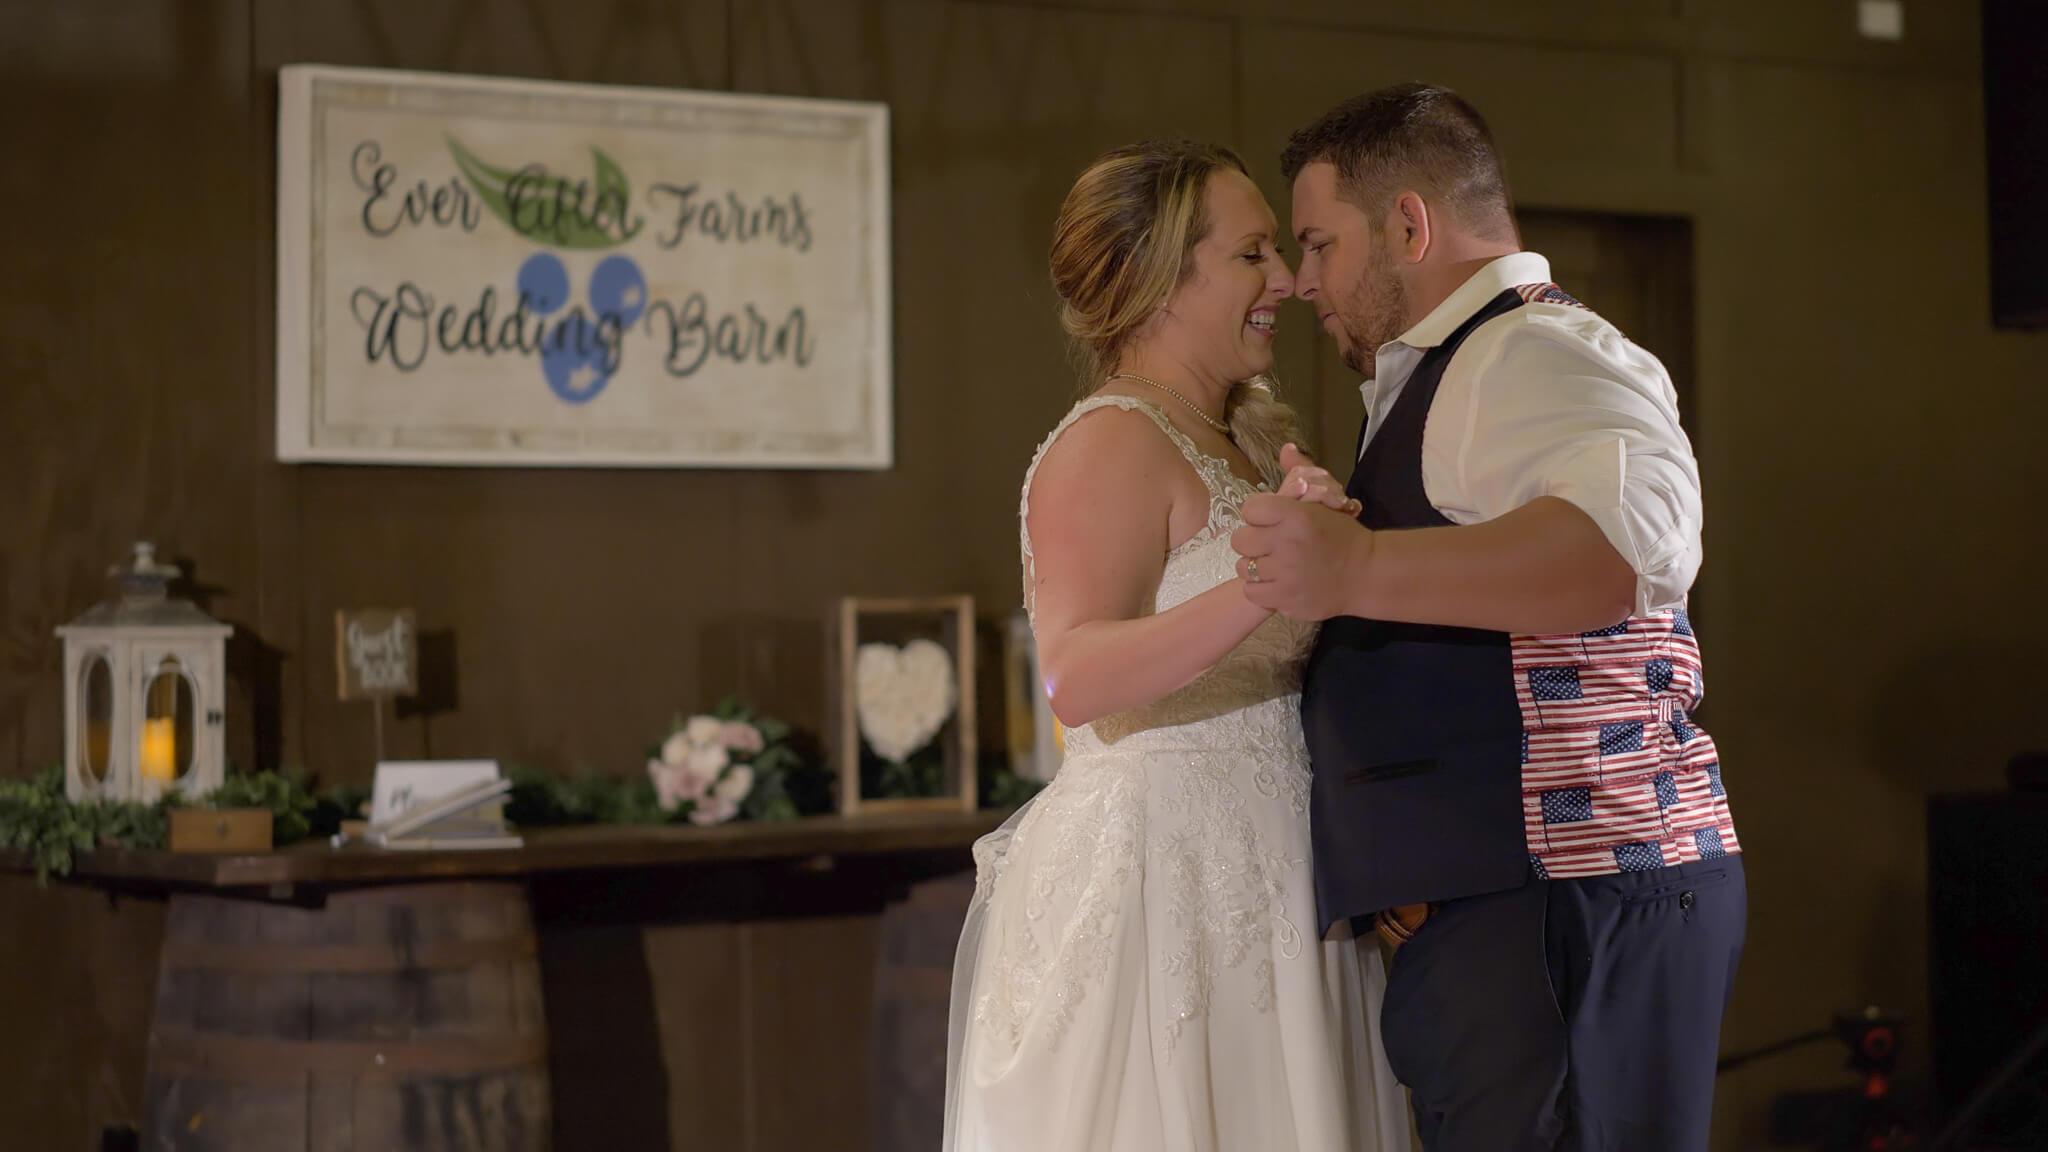 Married Couple Dancing at Ever After Farms Blueberry Barn Wedding